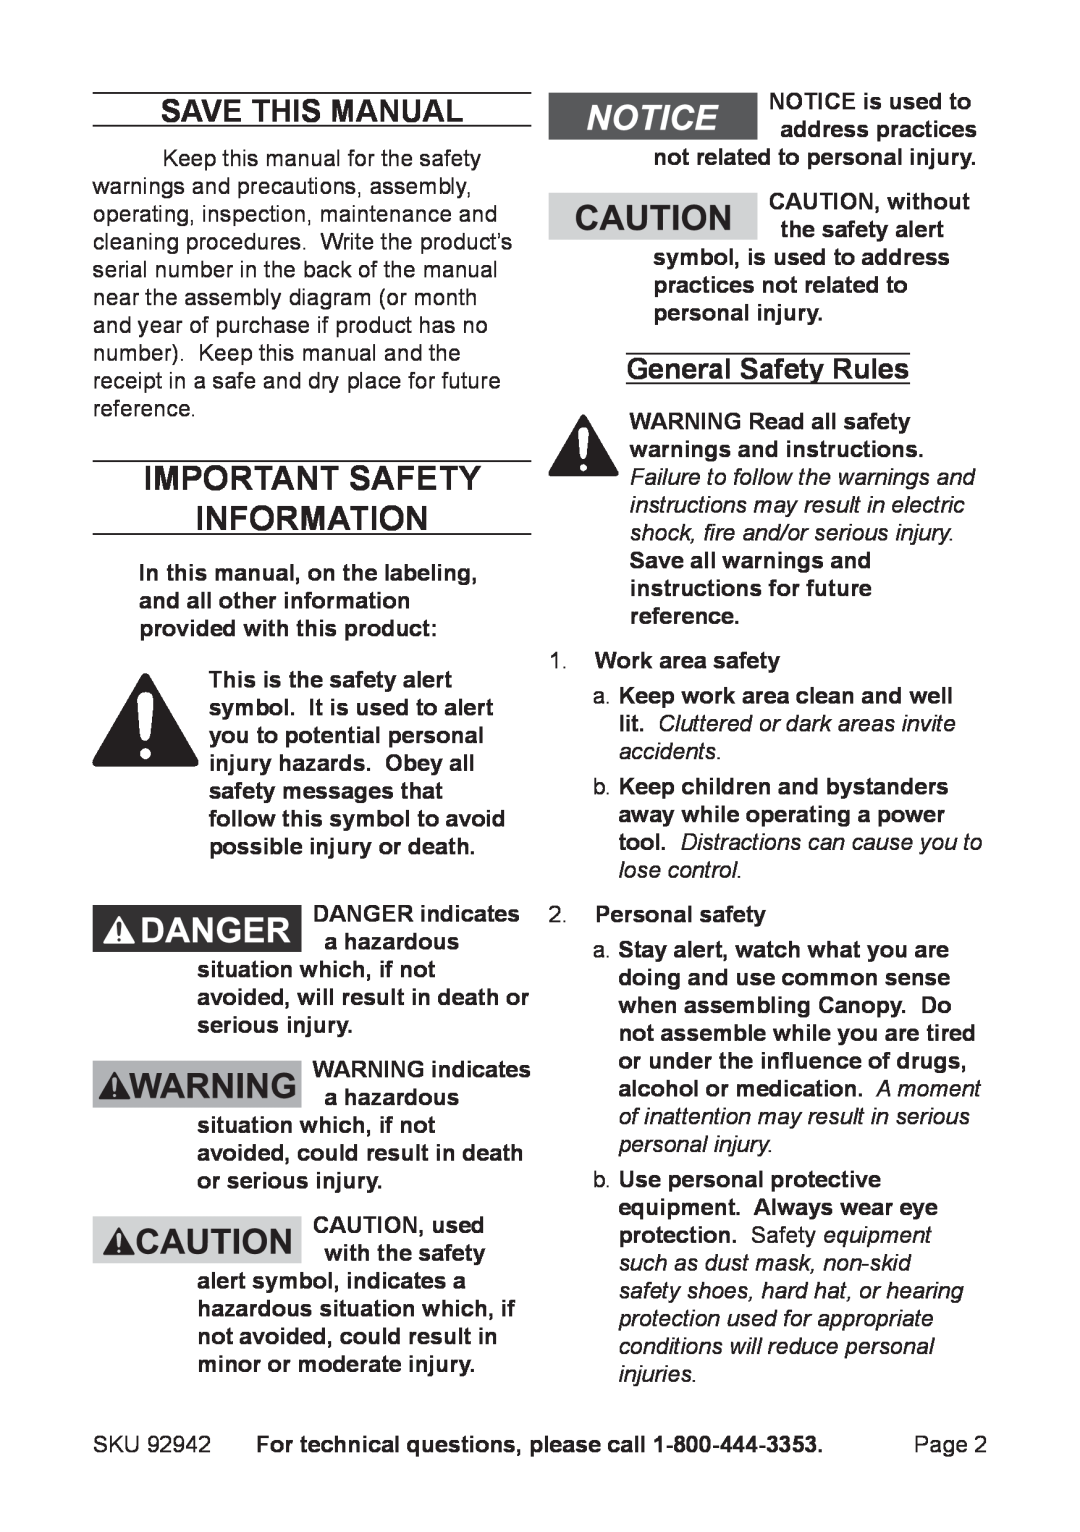 Harbor Freight Tools 92942 manual Important SAFETY Information, Save This Manual, General Safety Rules, Work area safety 